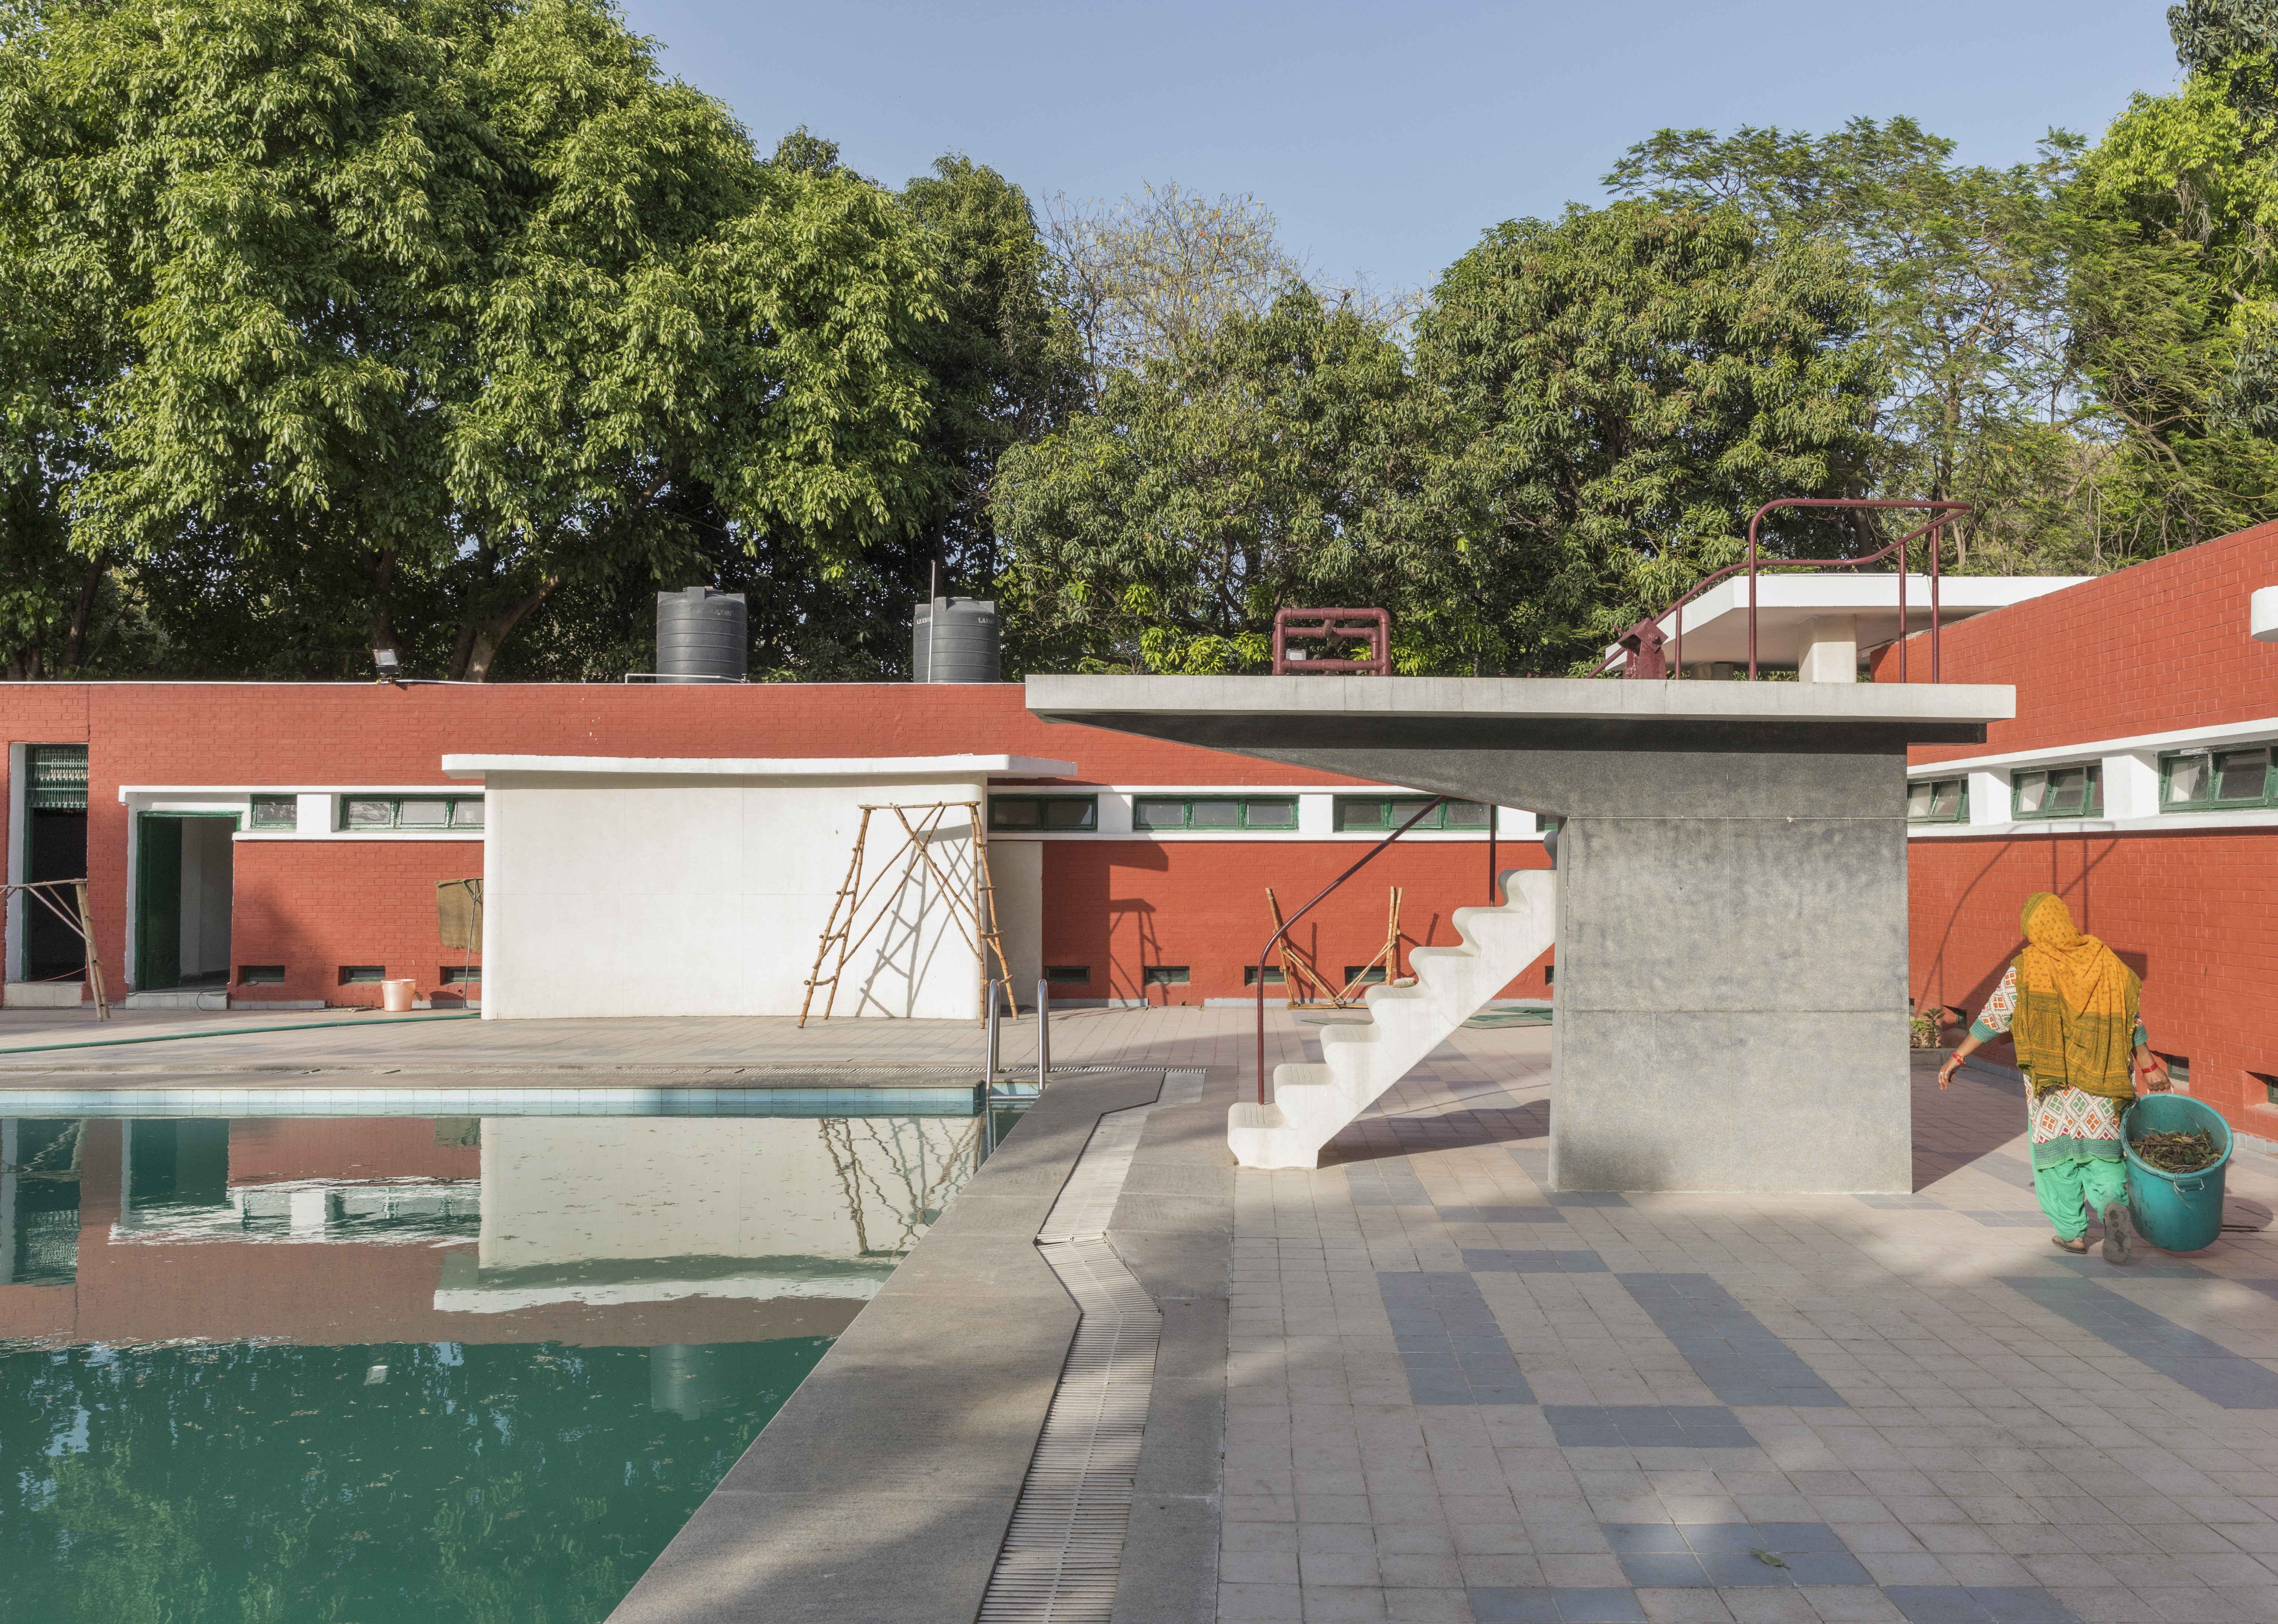 A swimming pool with a diving board made of concrete.